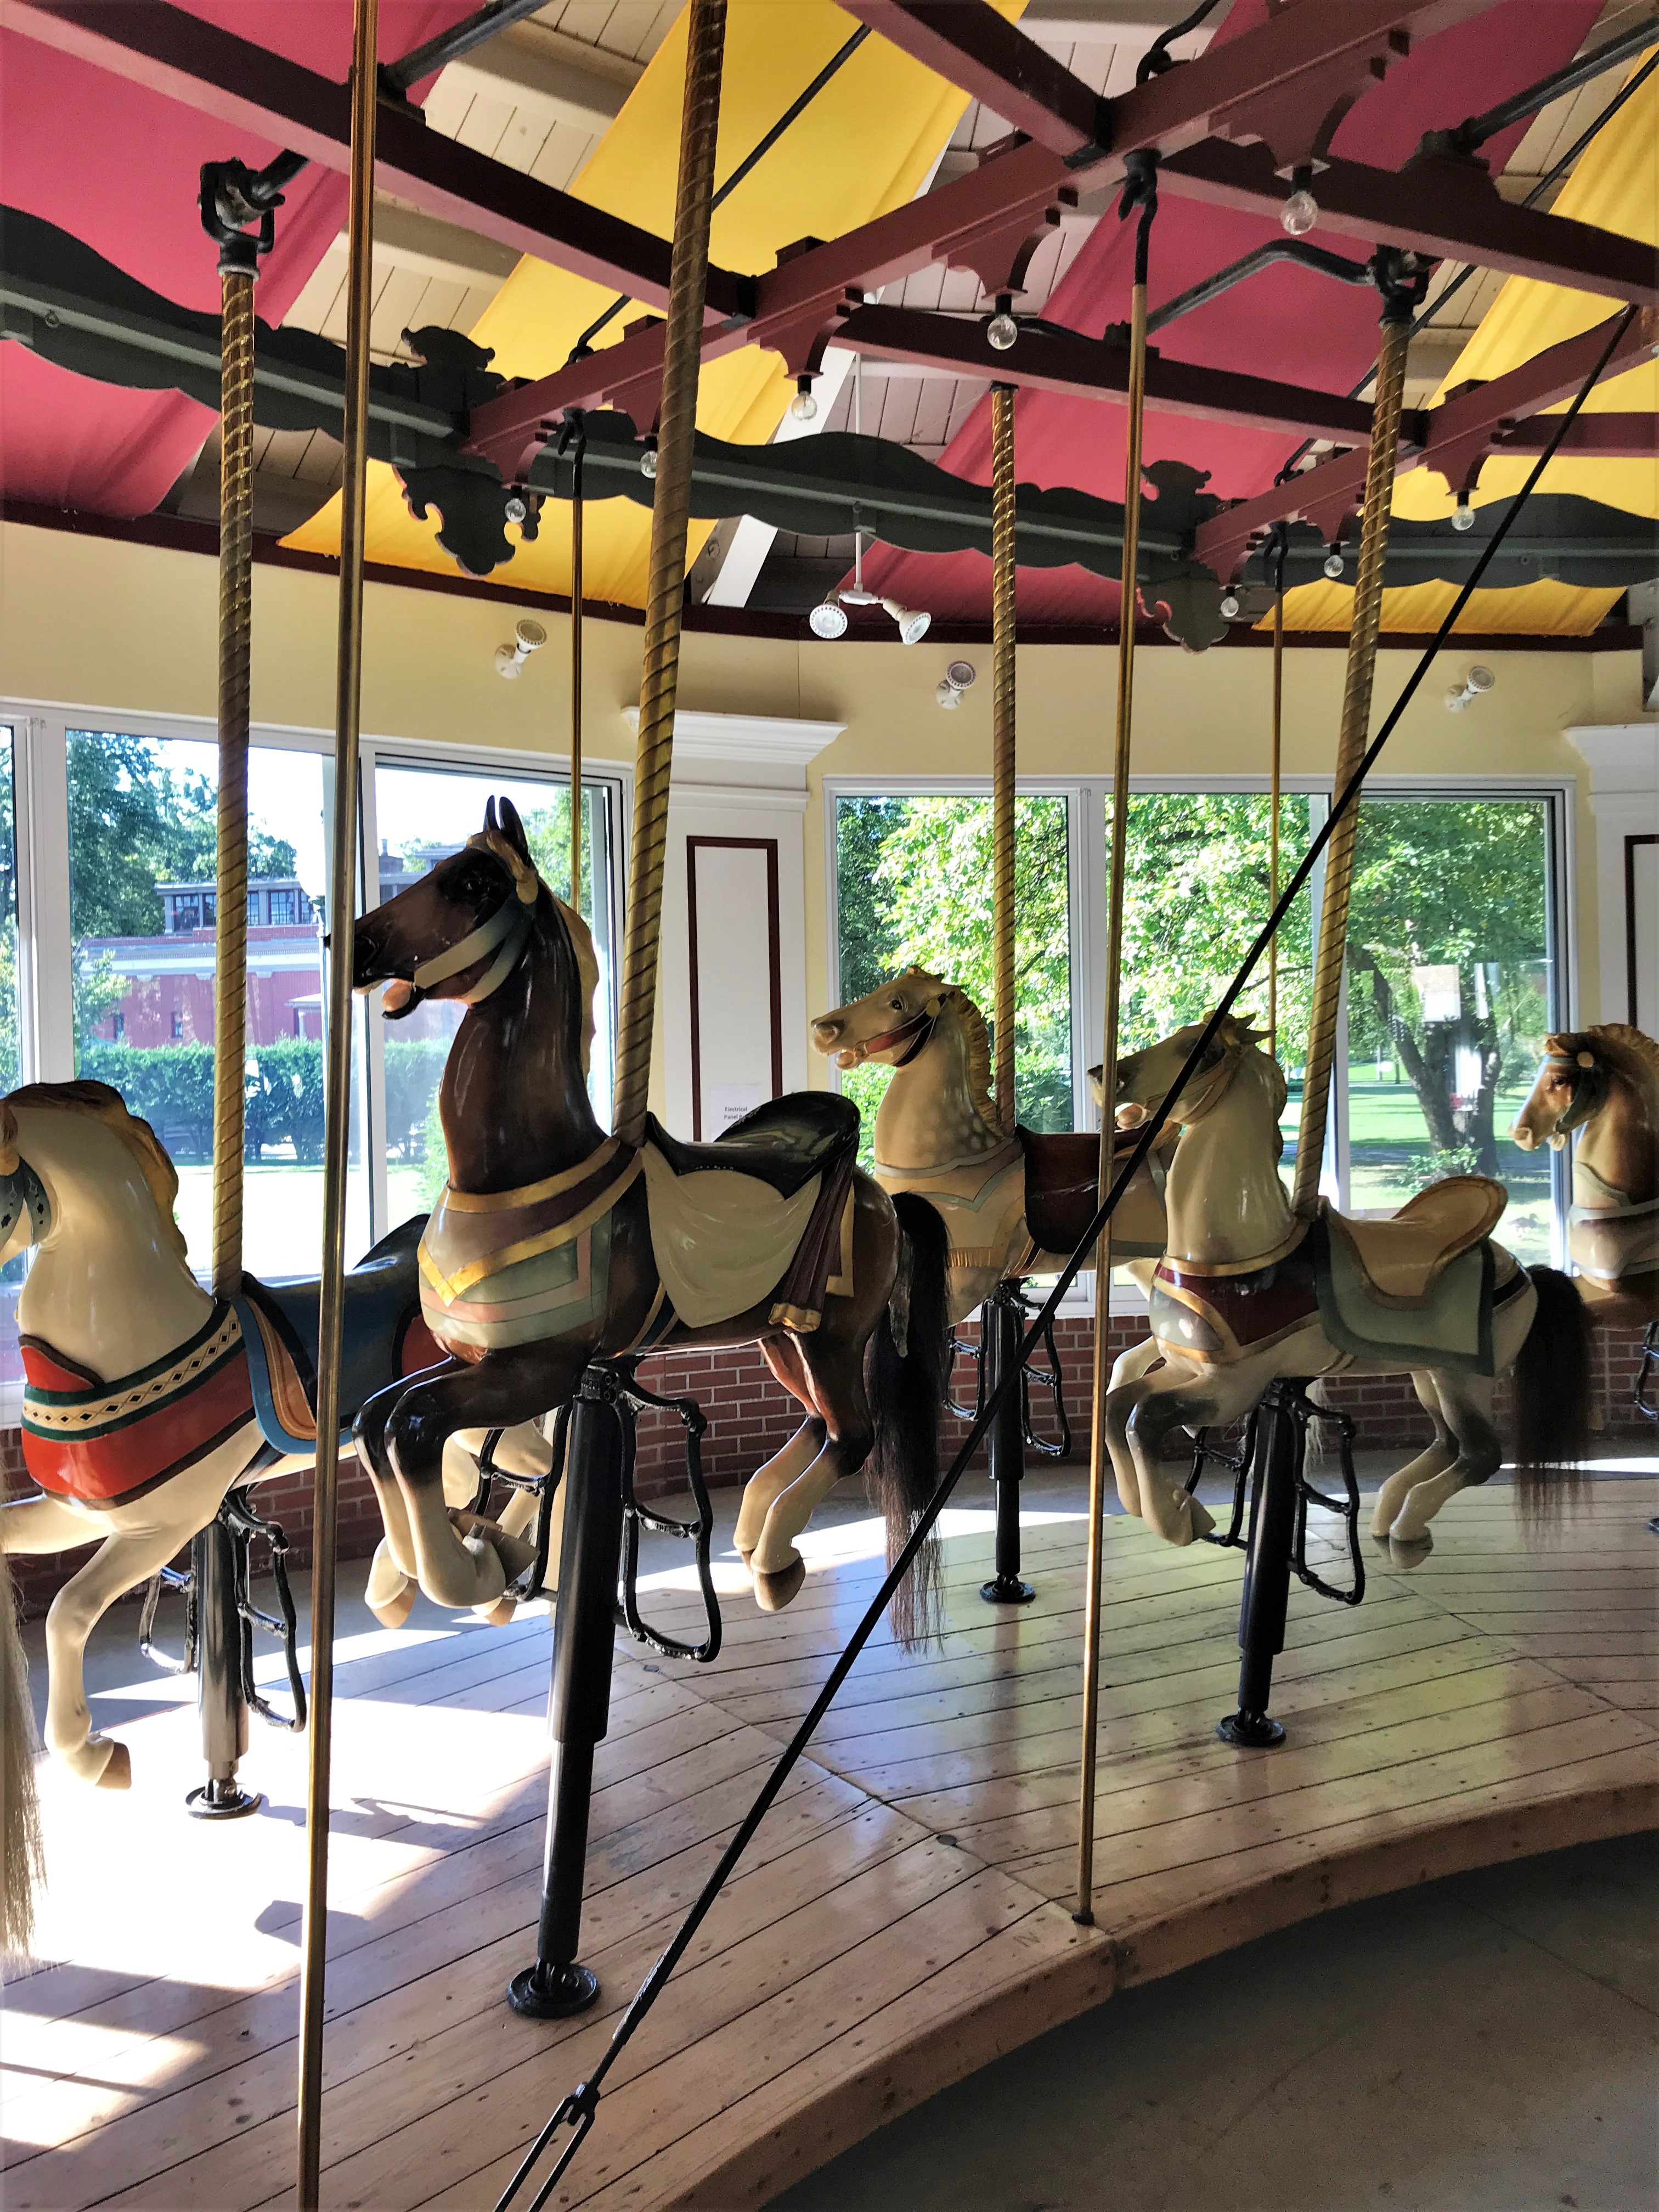 Several carousel horses with red and yellow ceiling